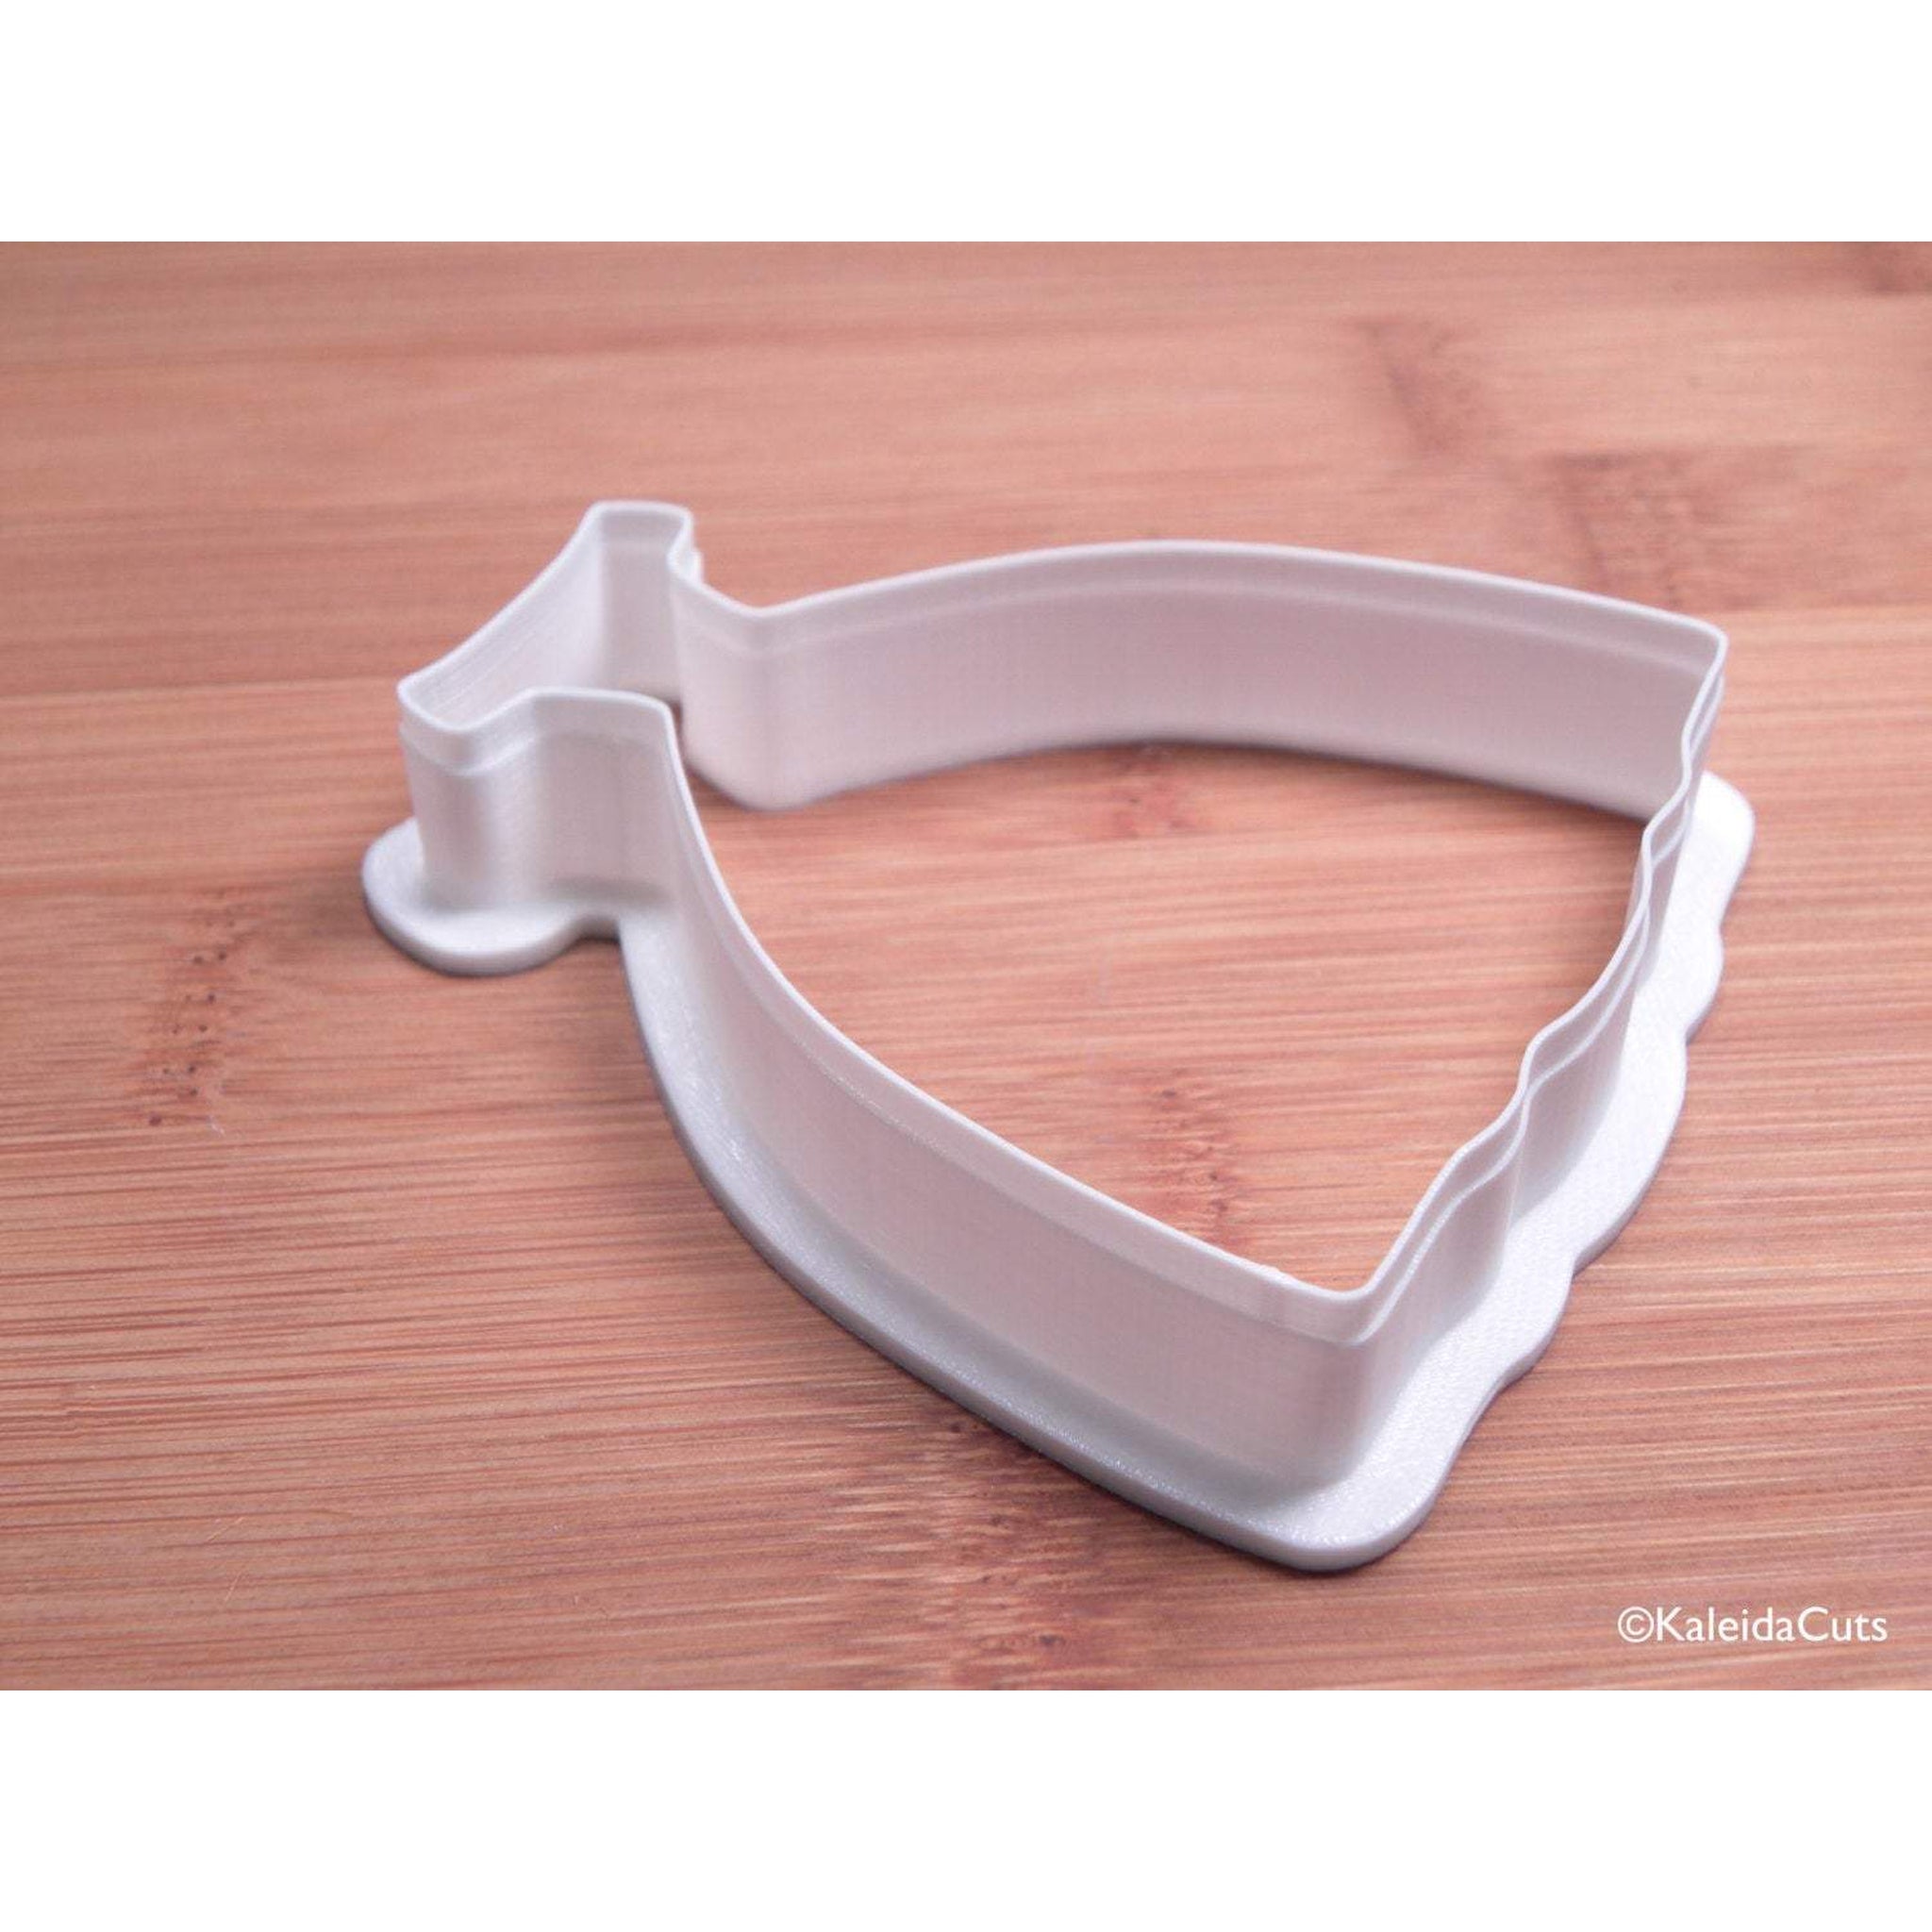 Mix N' Match Bridal Gown Cookie Cutters